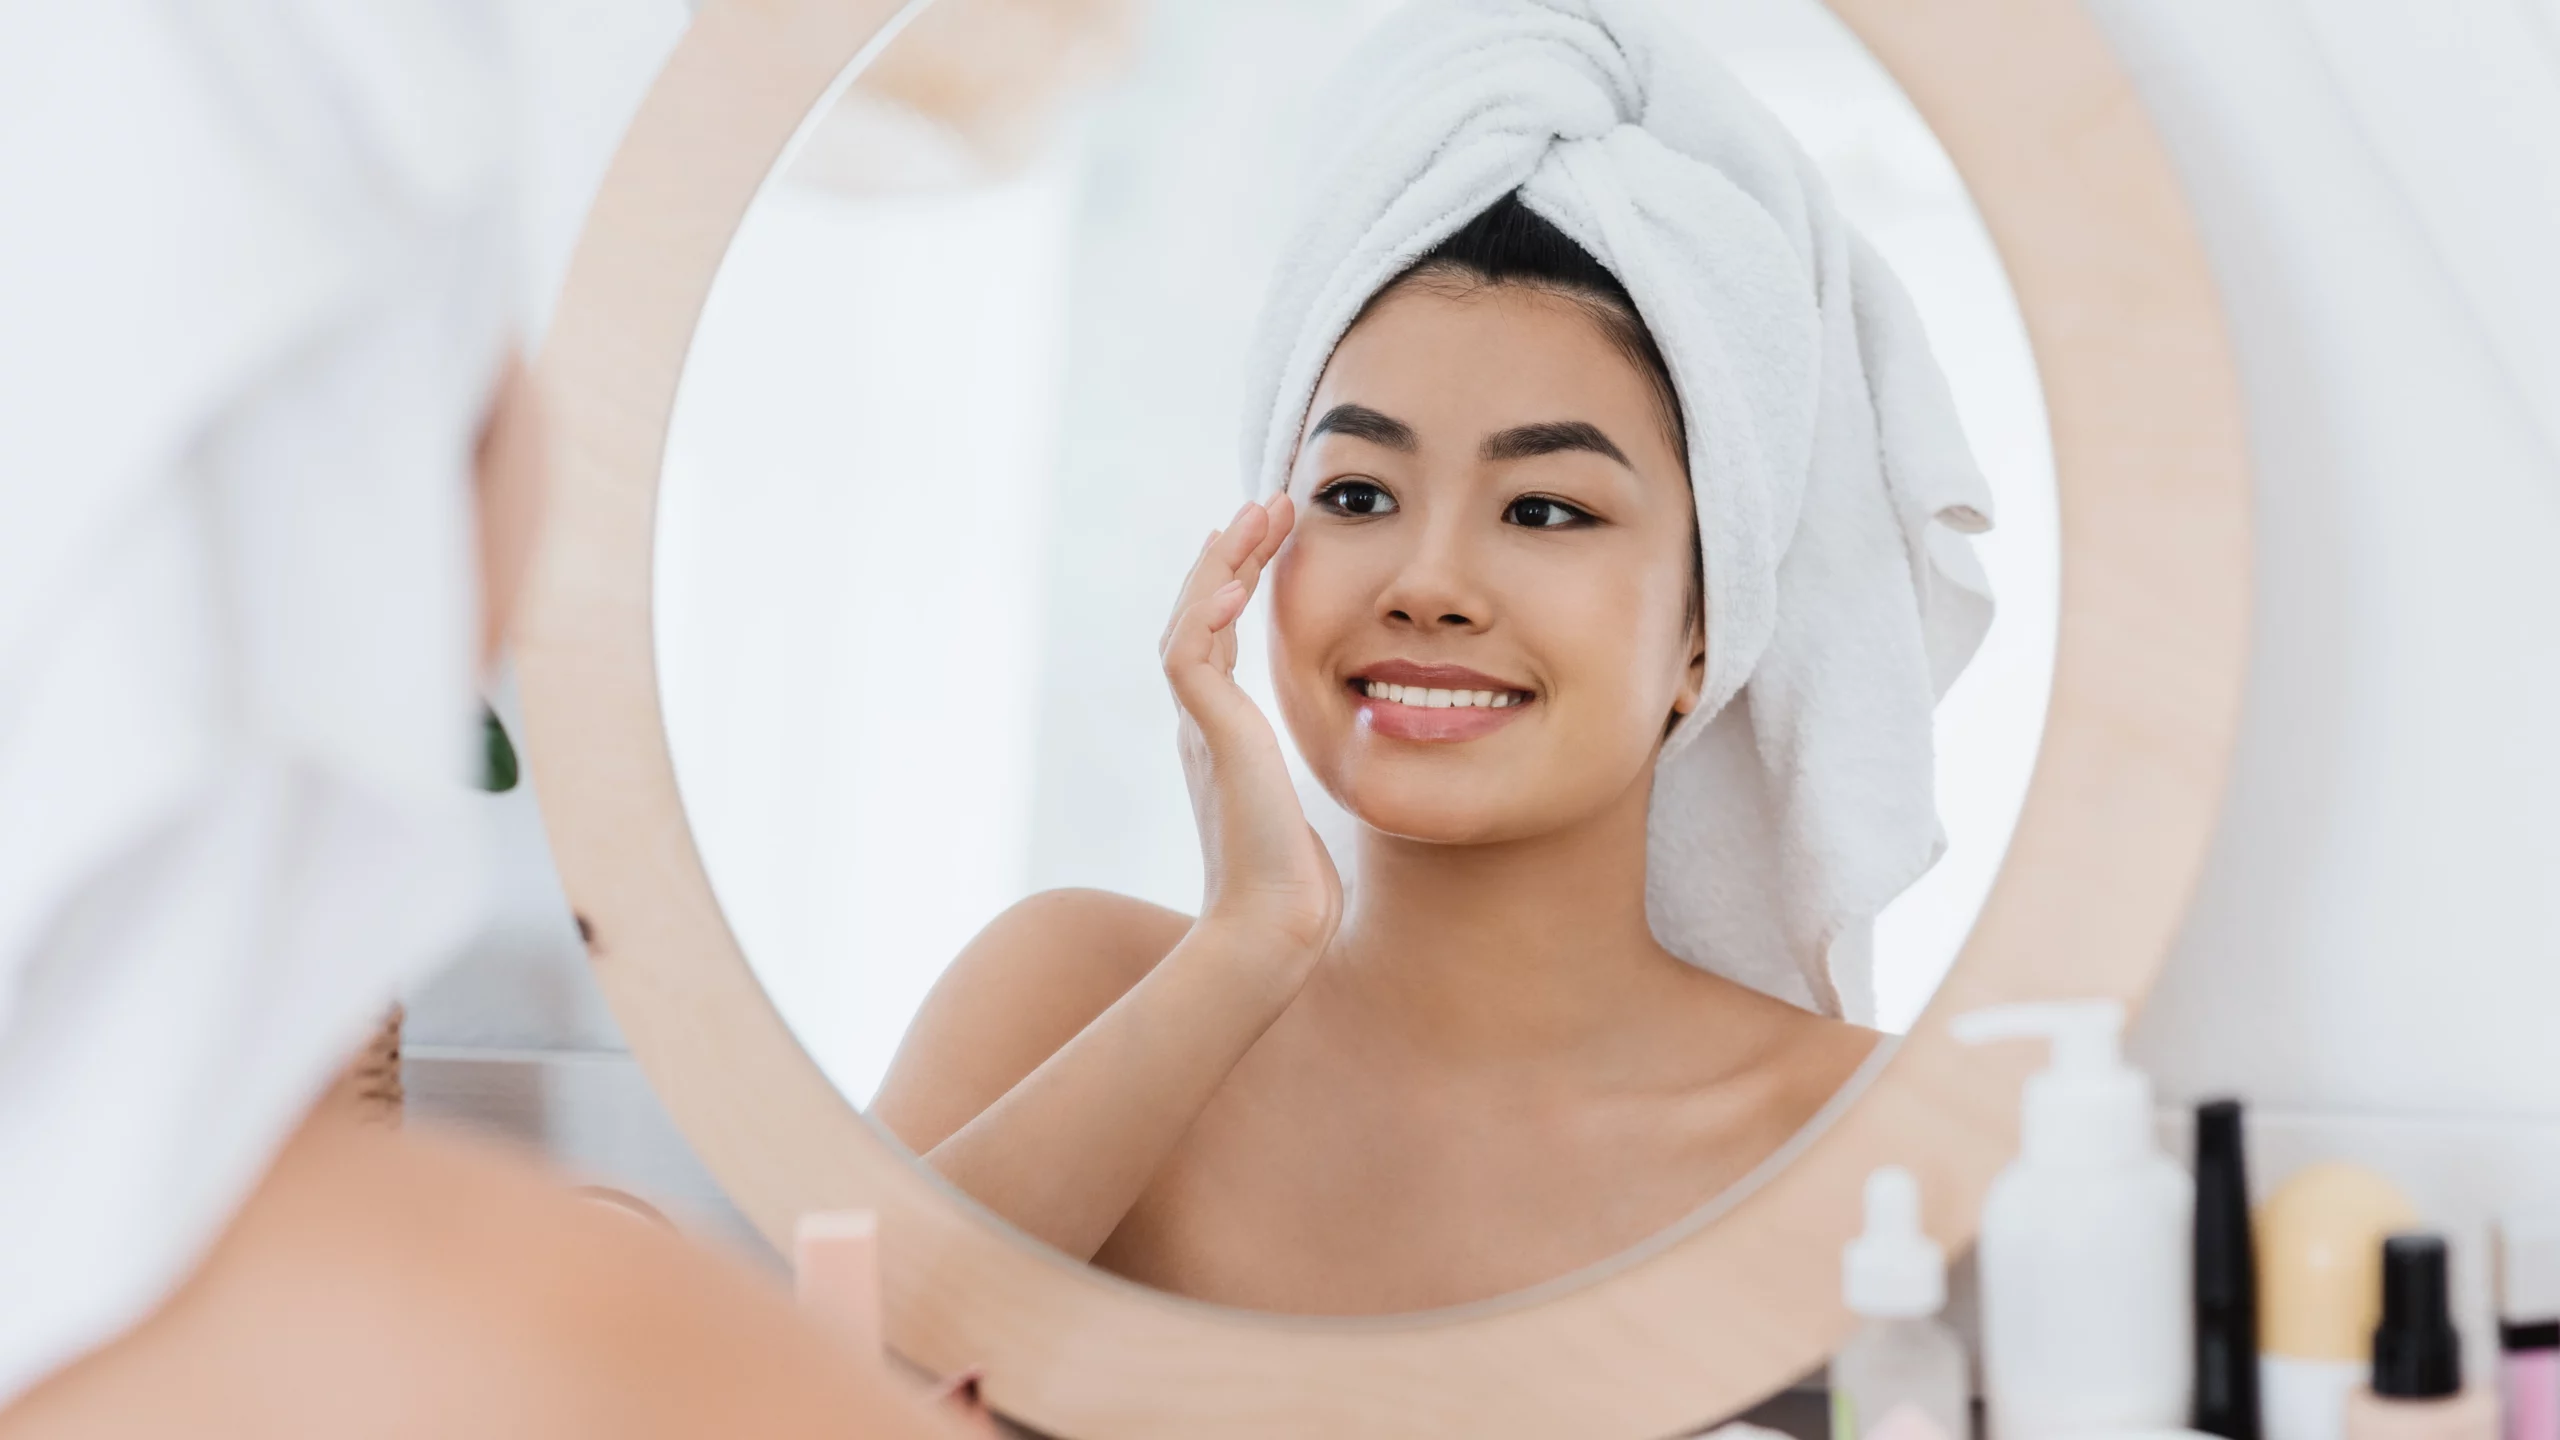 Asian woman looking in the mirror while wearing a towel over her head and touching her face.